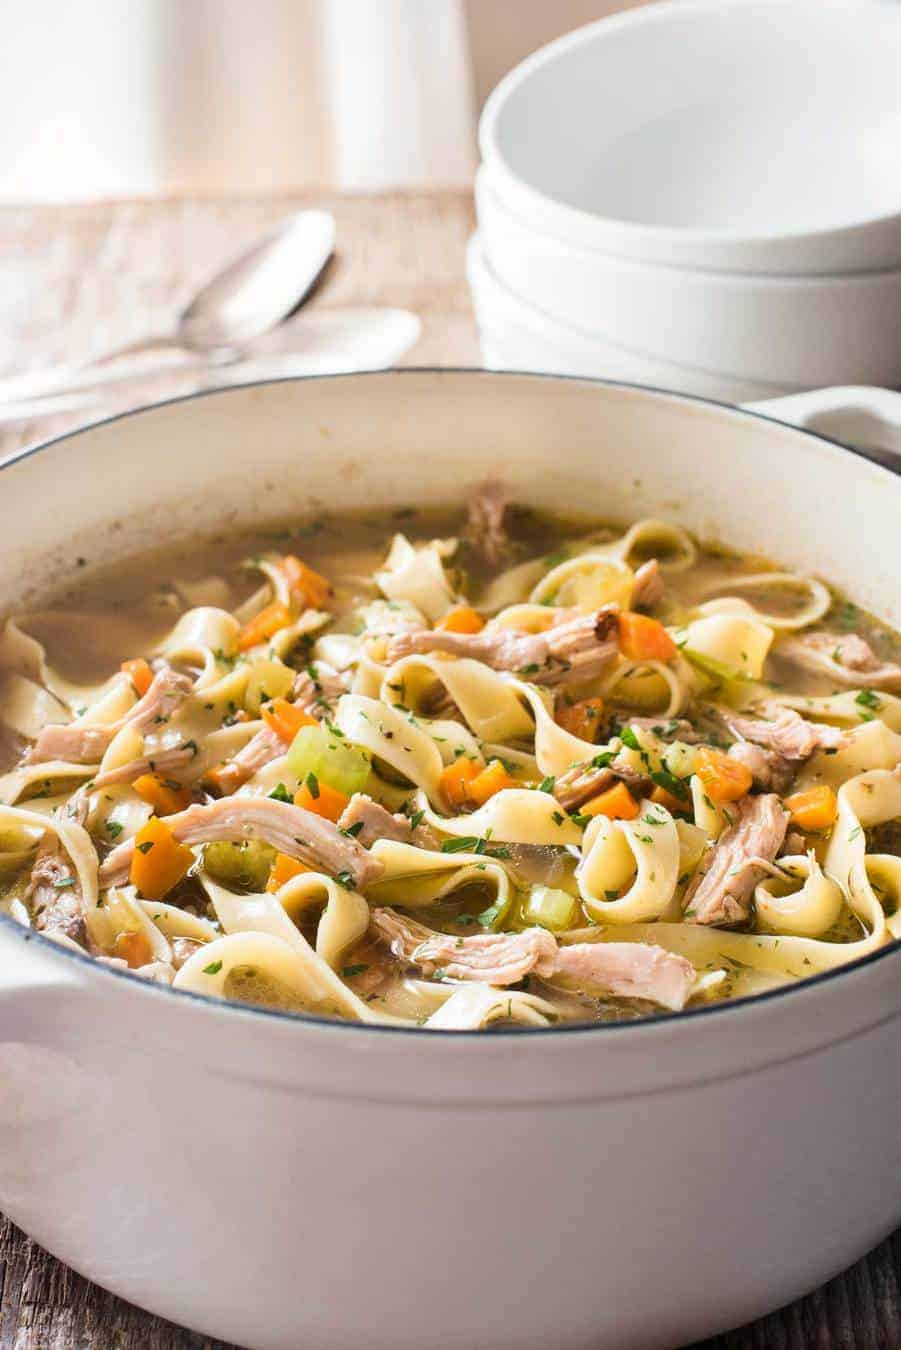 Chicken Noodle Soup With Vegetables
 Easy Chicken Noodle Soup